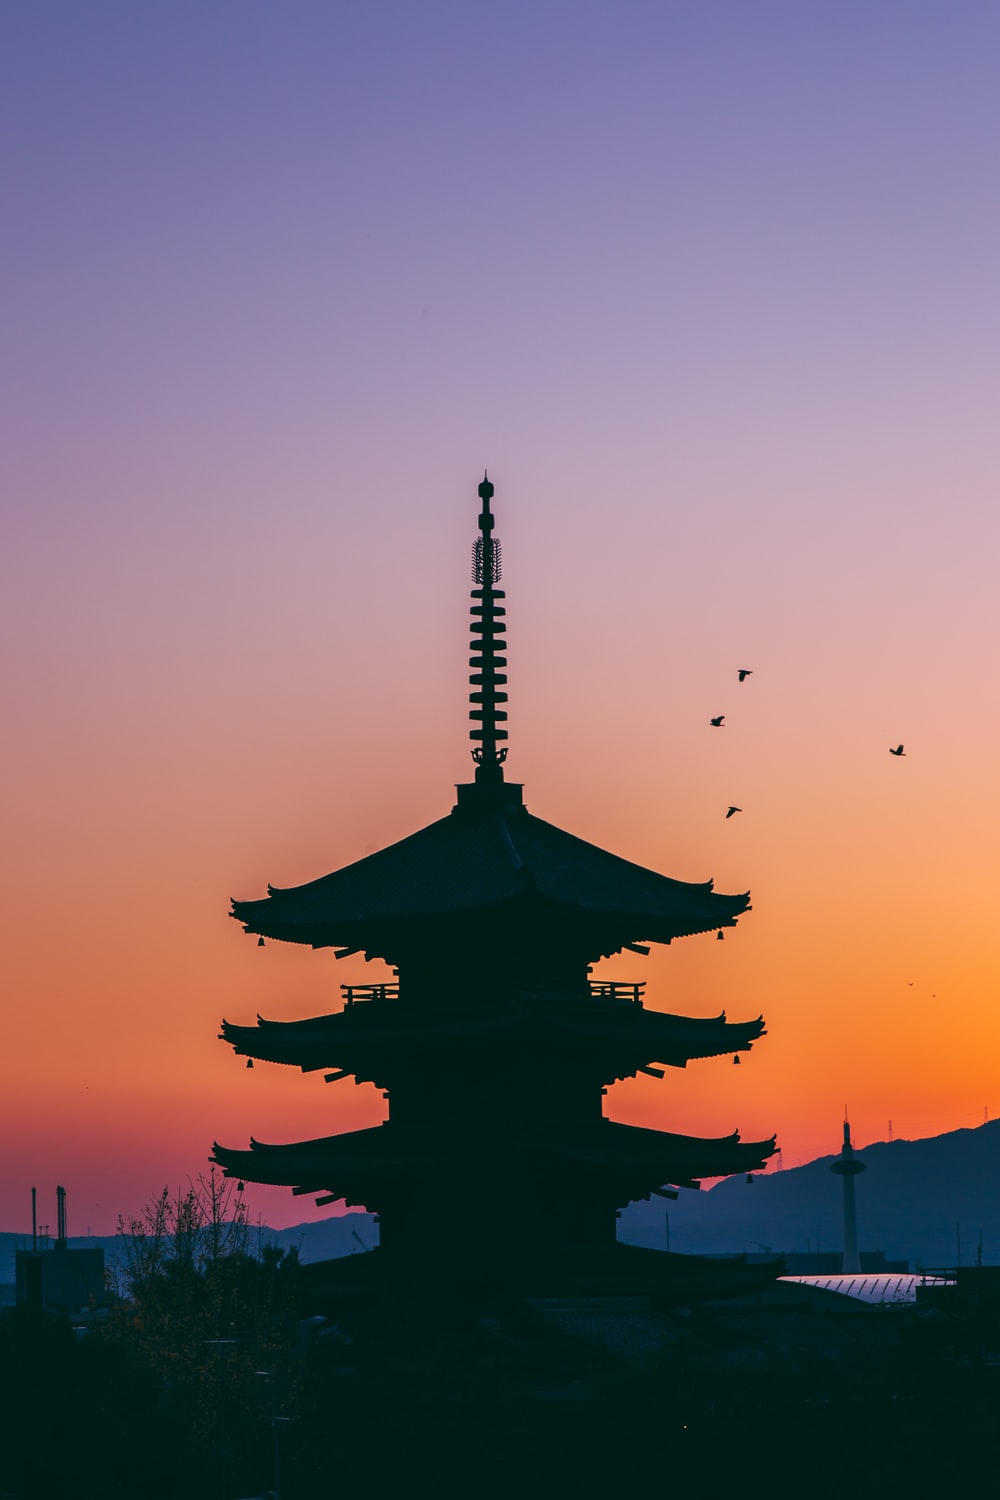 Sunset Japan Picture. Download Free Image